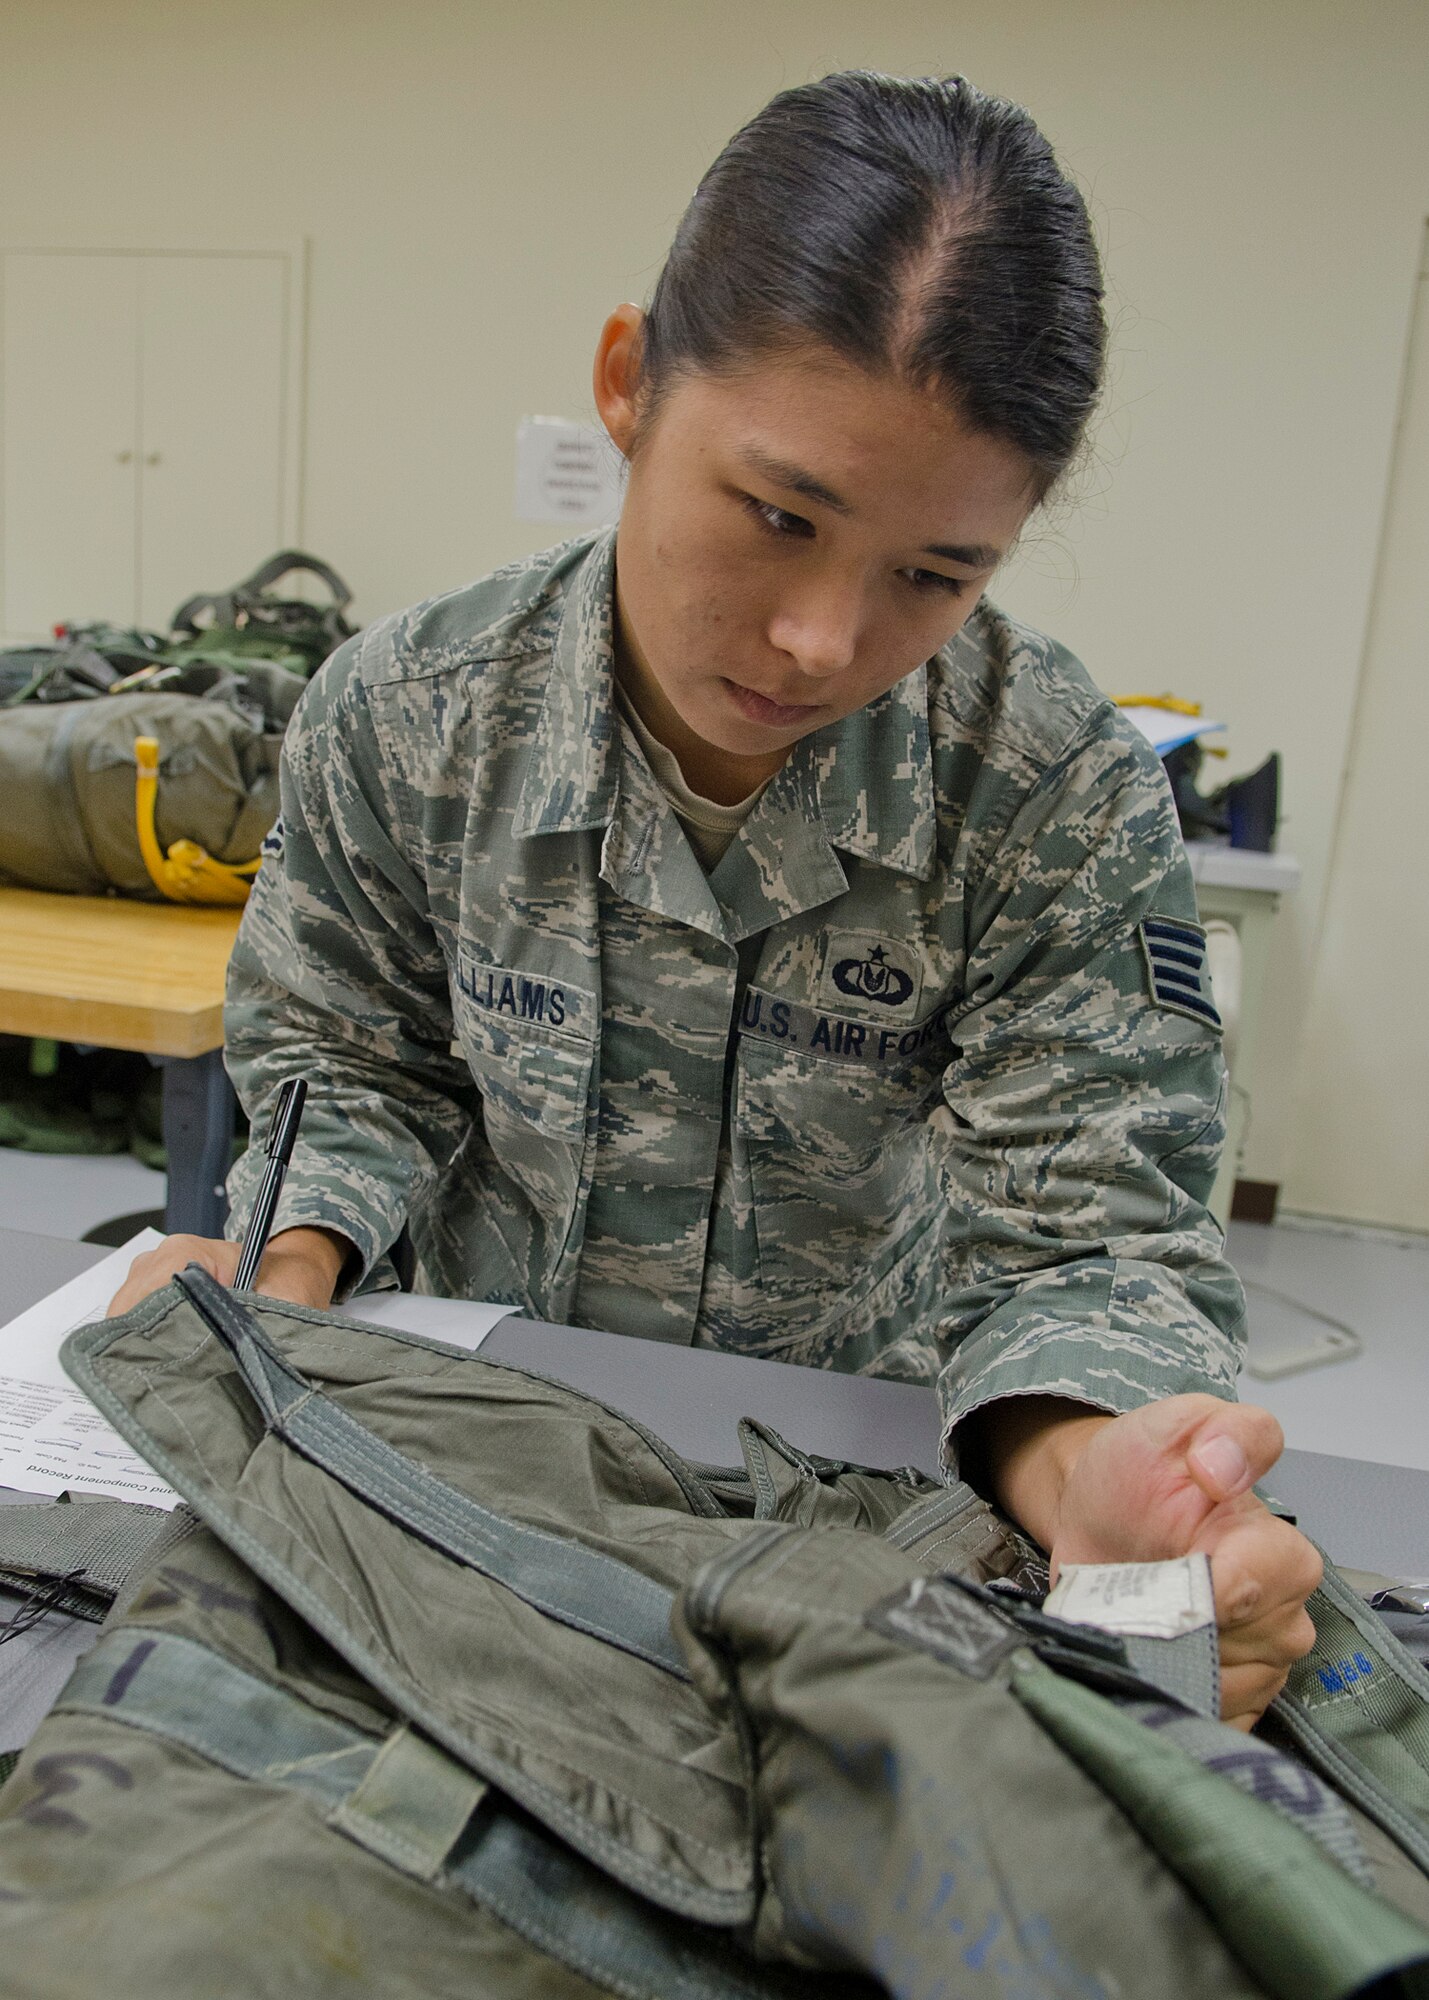 Staff Sgt. Jamie Williams, 36th Operations Support Squadron aircrew flight equipment craftsman, verifies identification numbers on a parachute pack May 20, 2014, at Andersen Air Force Base, Guam. Aircrew flight equipment Airmen manage, perform and schedule inspections, maintenance and adjustments on assigned aircrew flight equipment, defense equipment and associated supplies. (U.S. Air Force photo by Senior Airman Katrina M. Brisbin/Released)